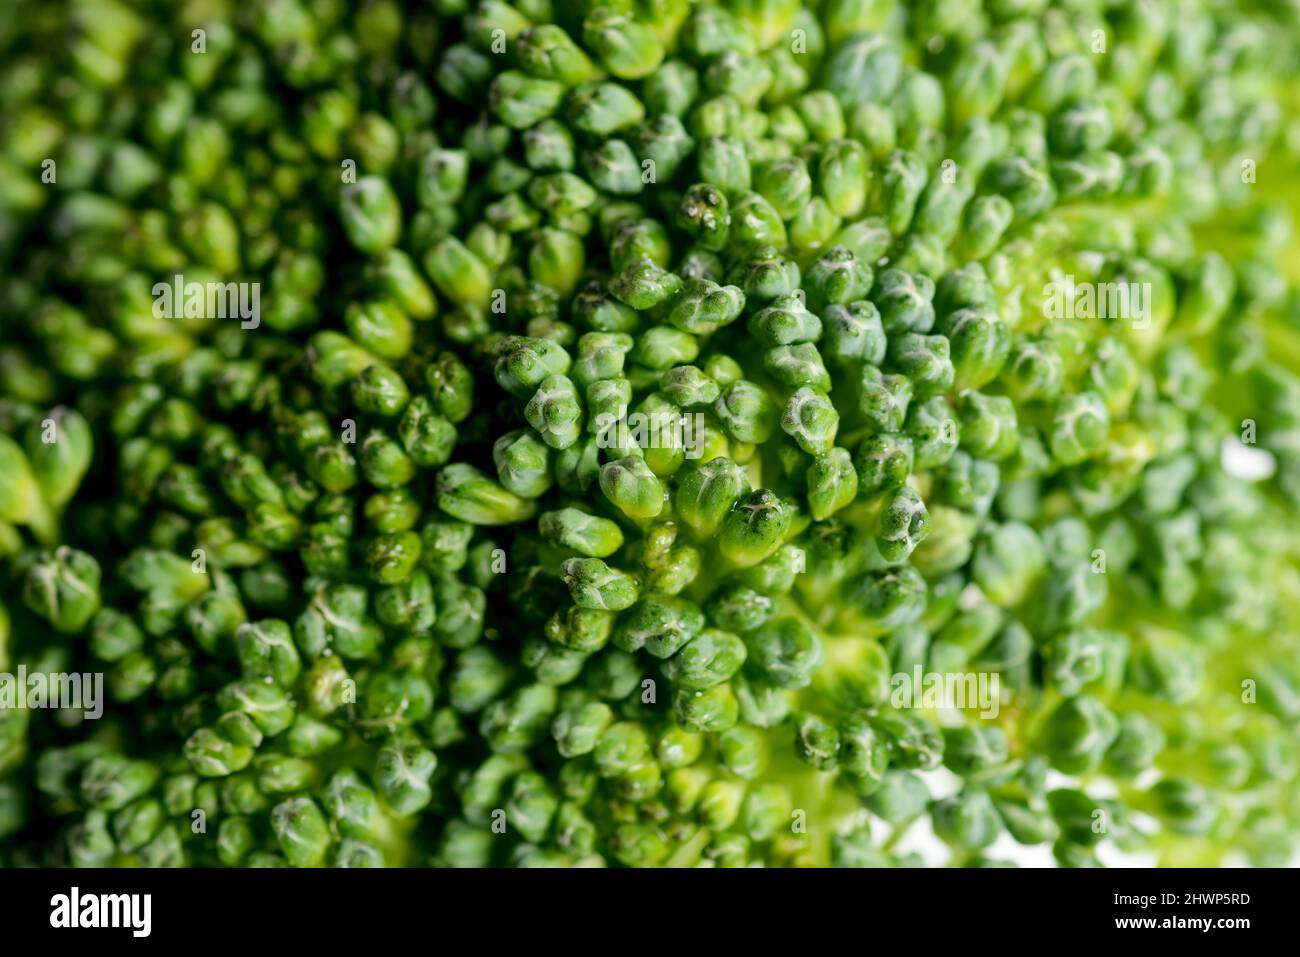 Close up shot of broccoli textured background. Stock Photo